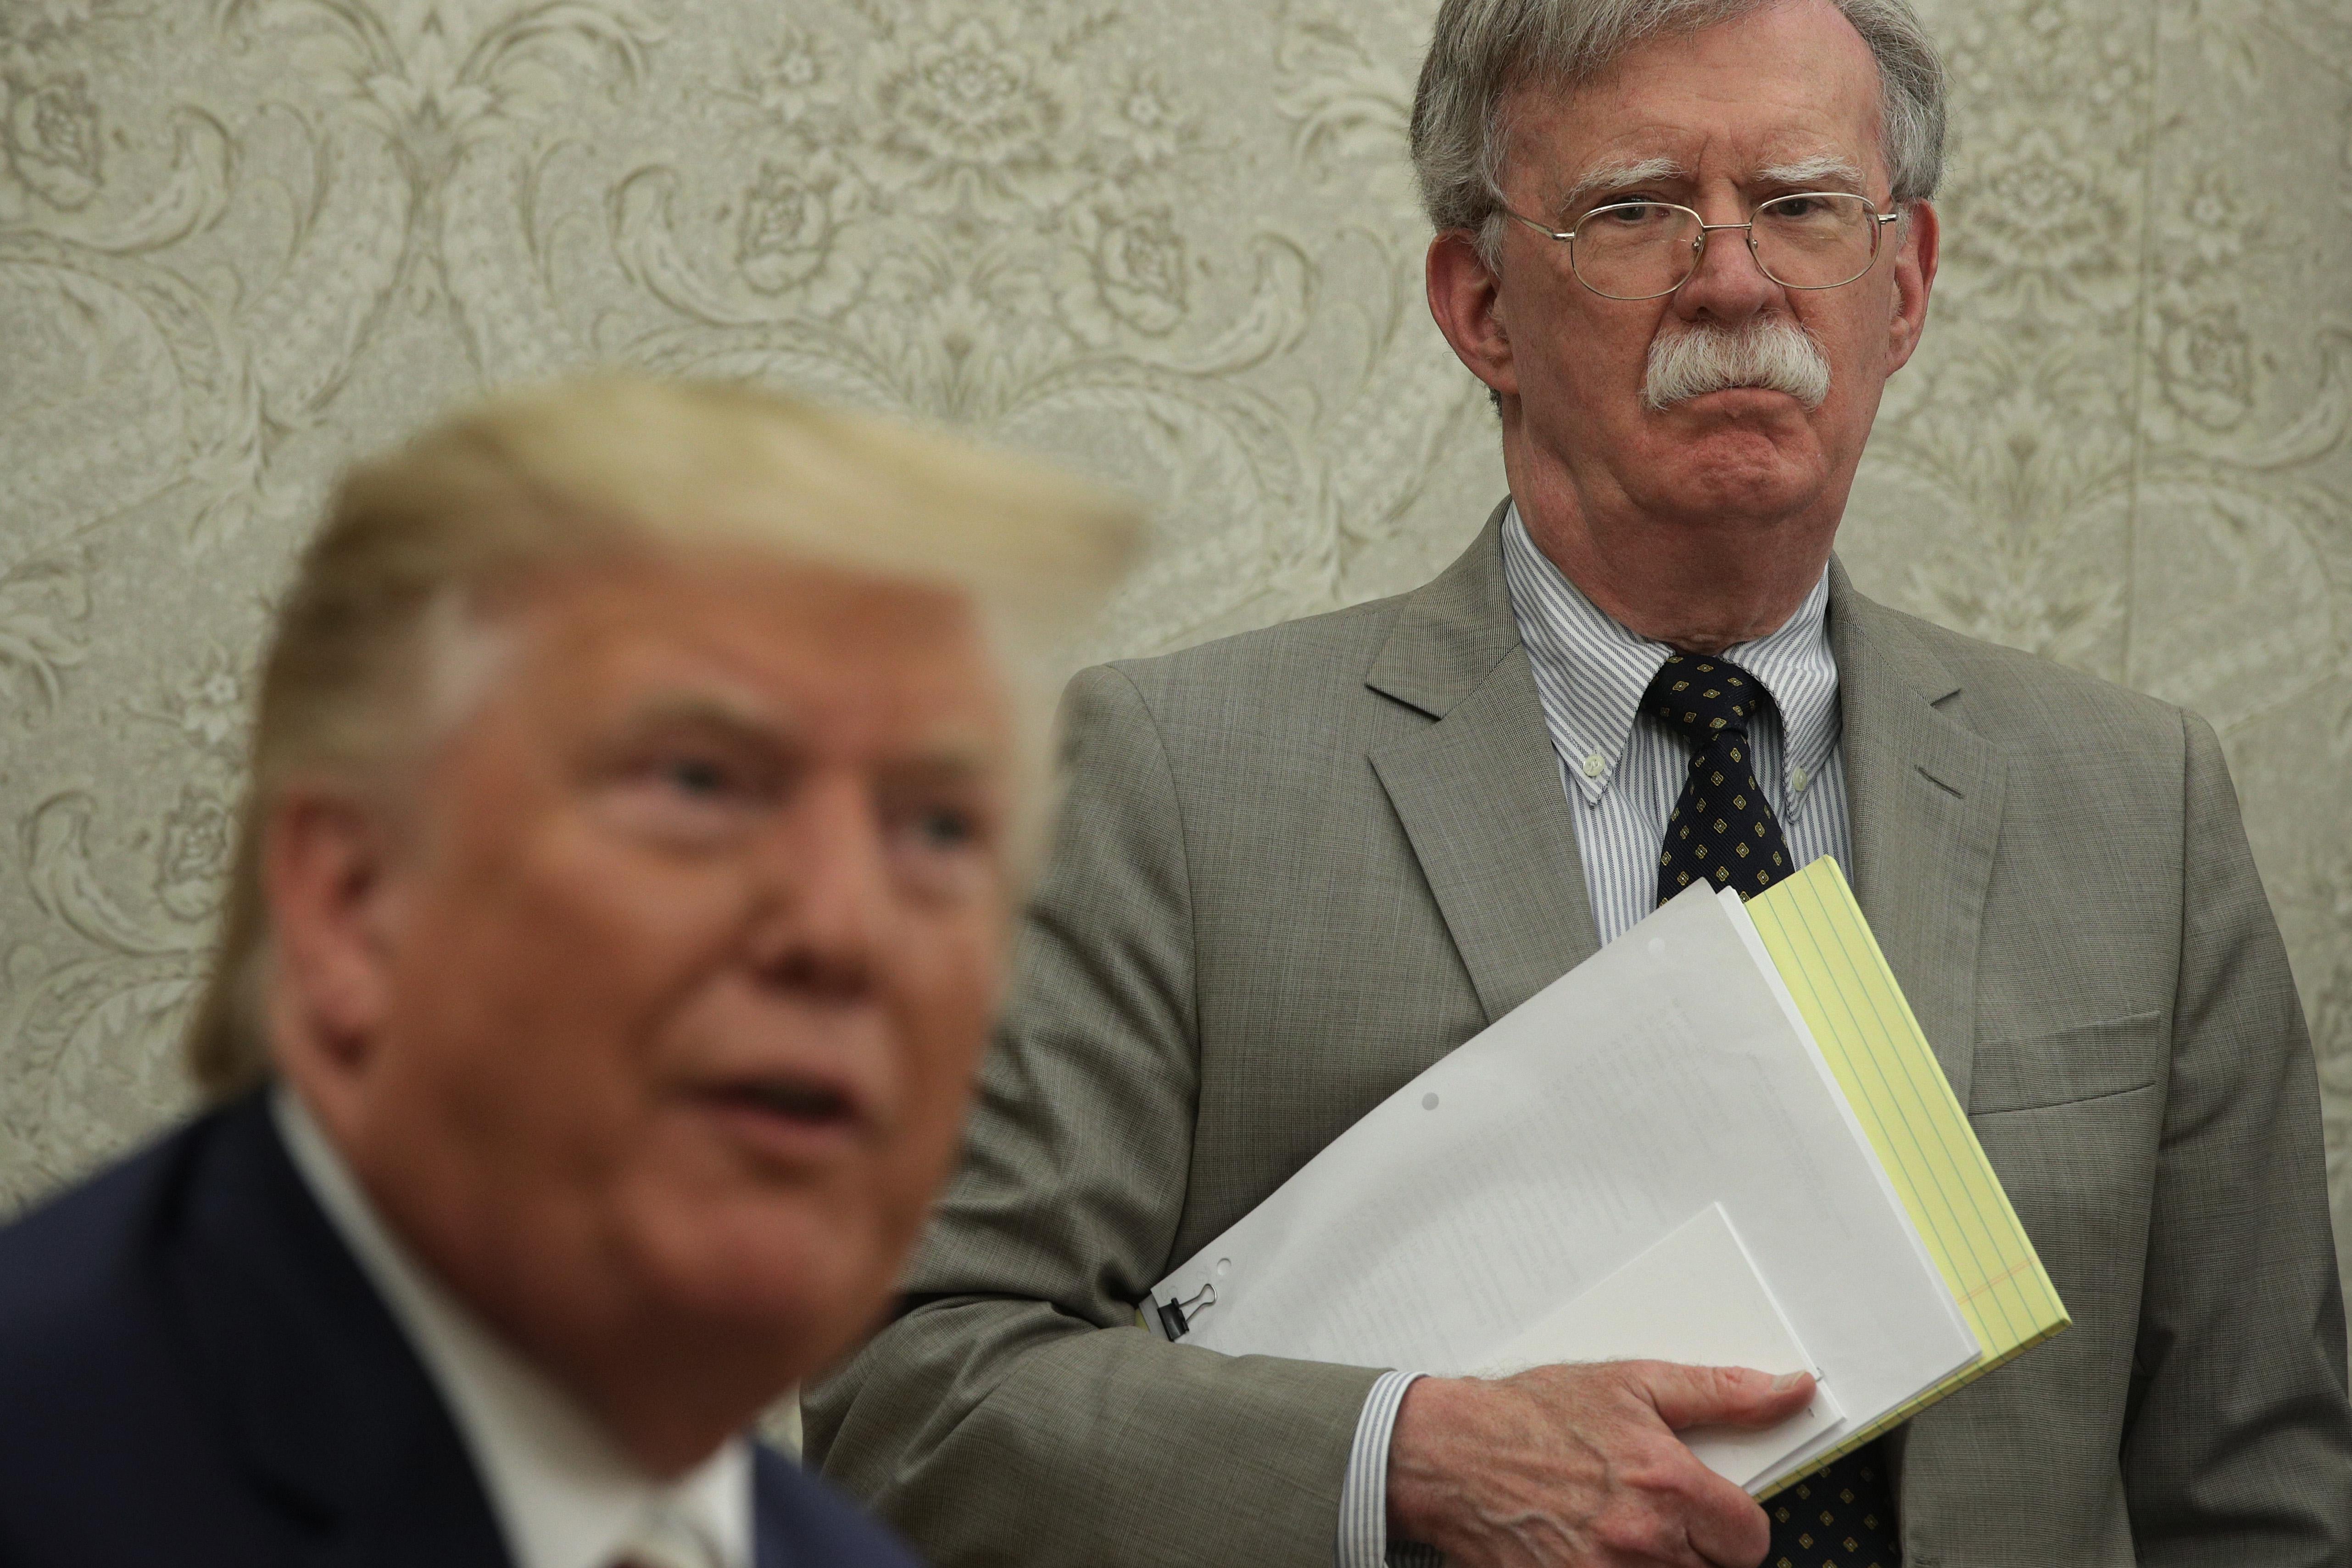 Bolton holding papers and looking at Trump, who is speaking.